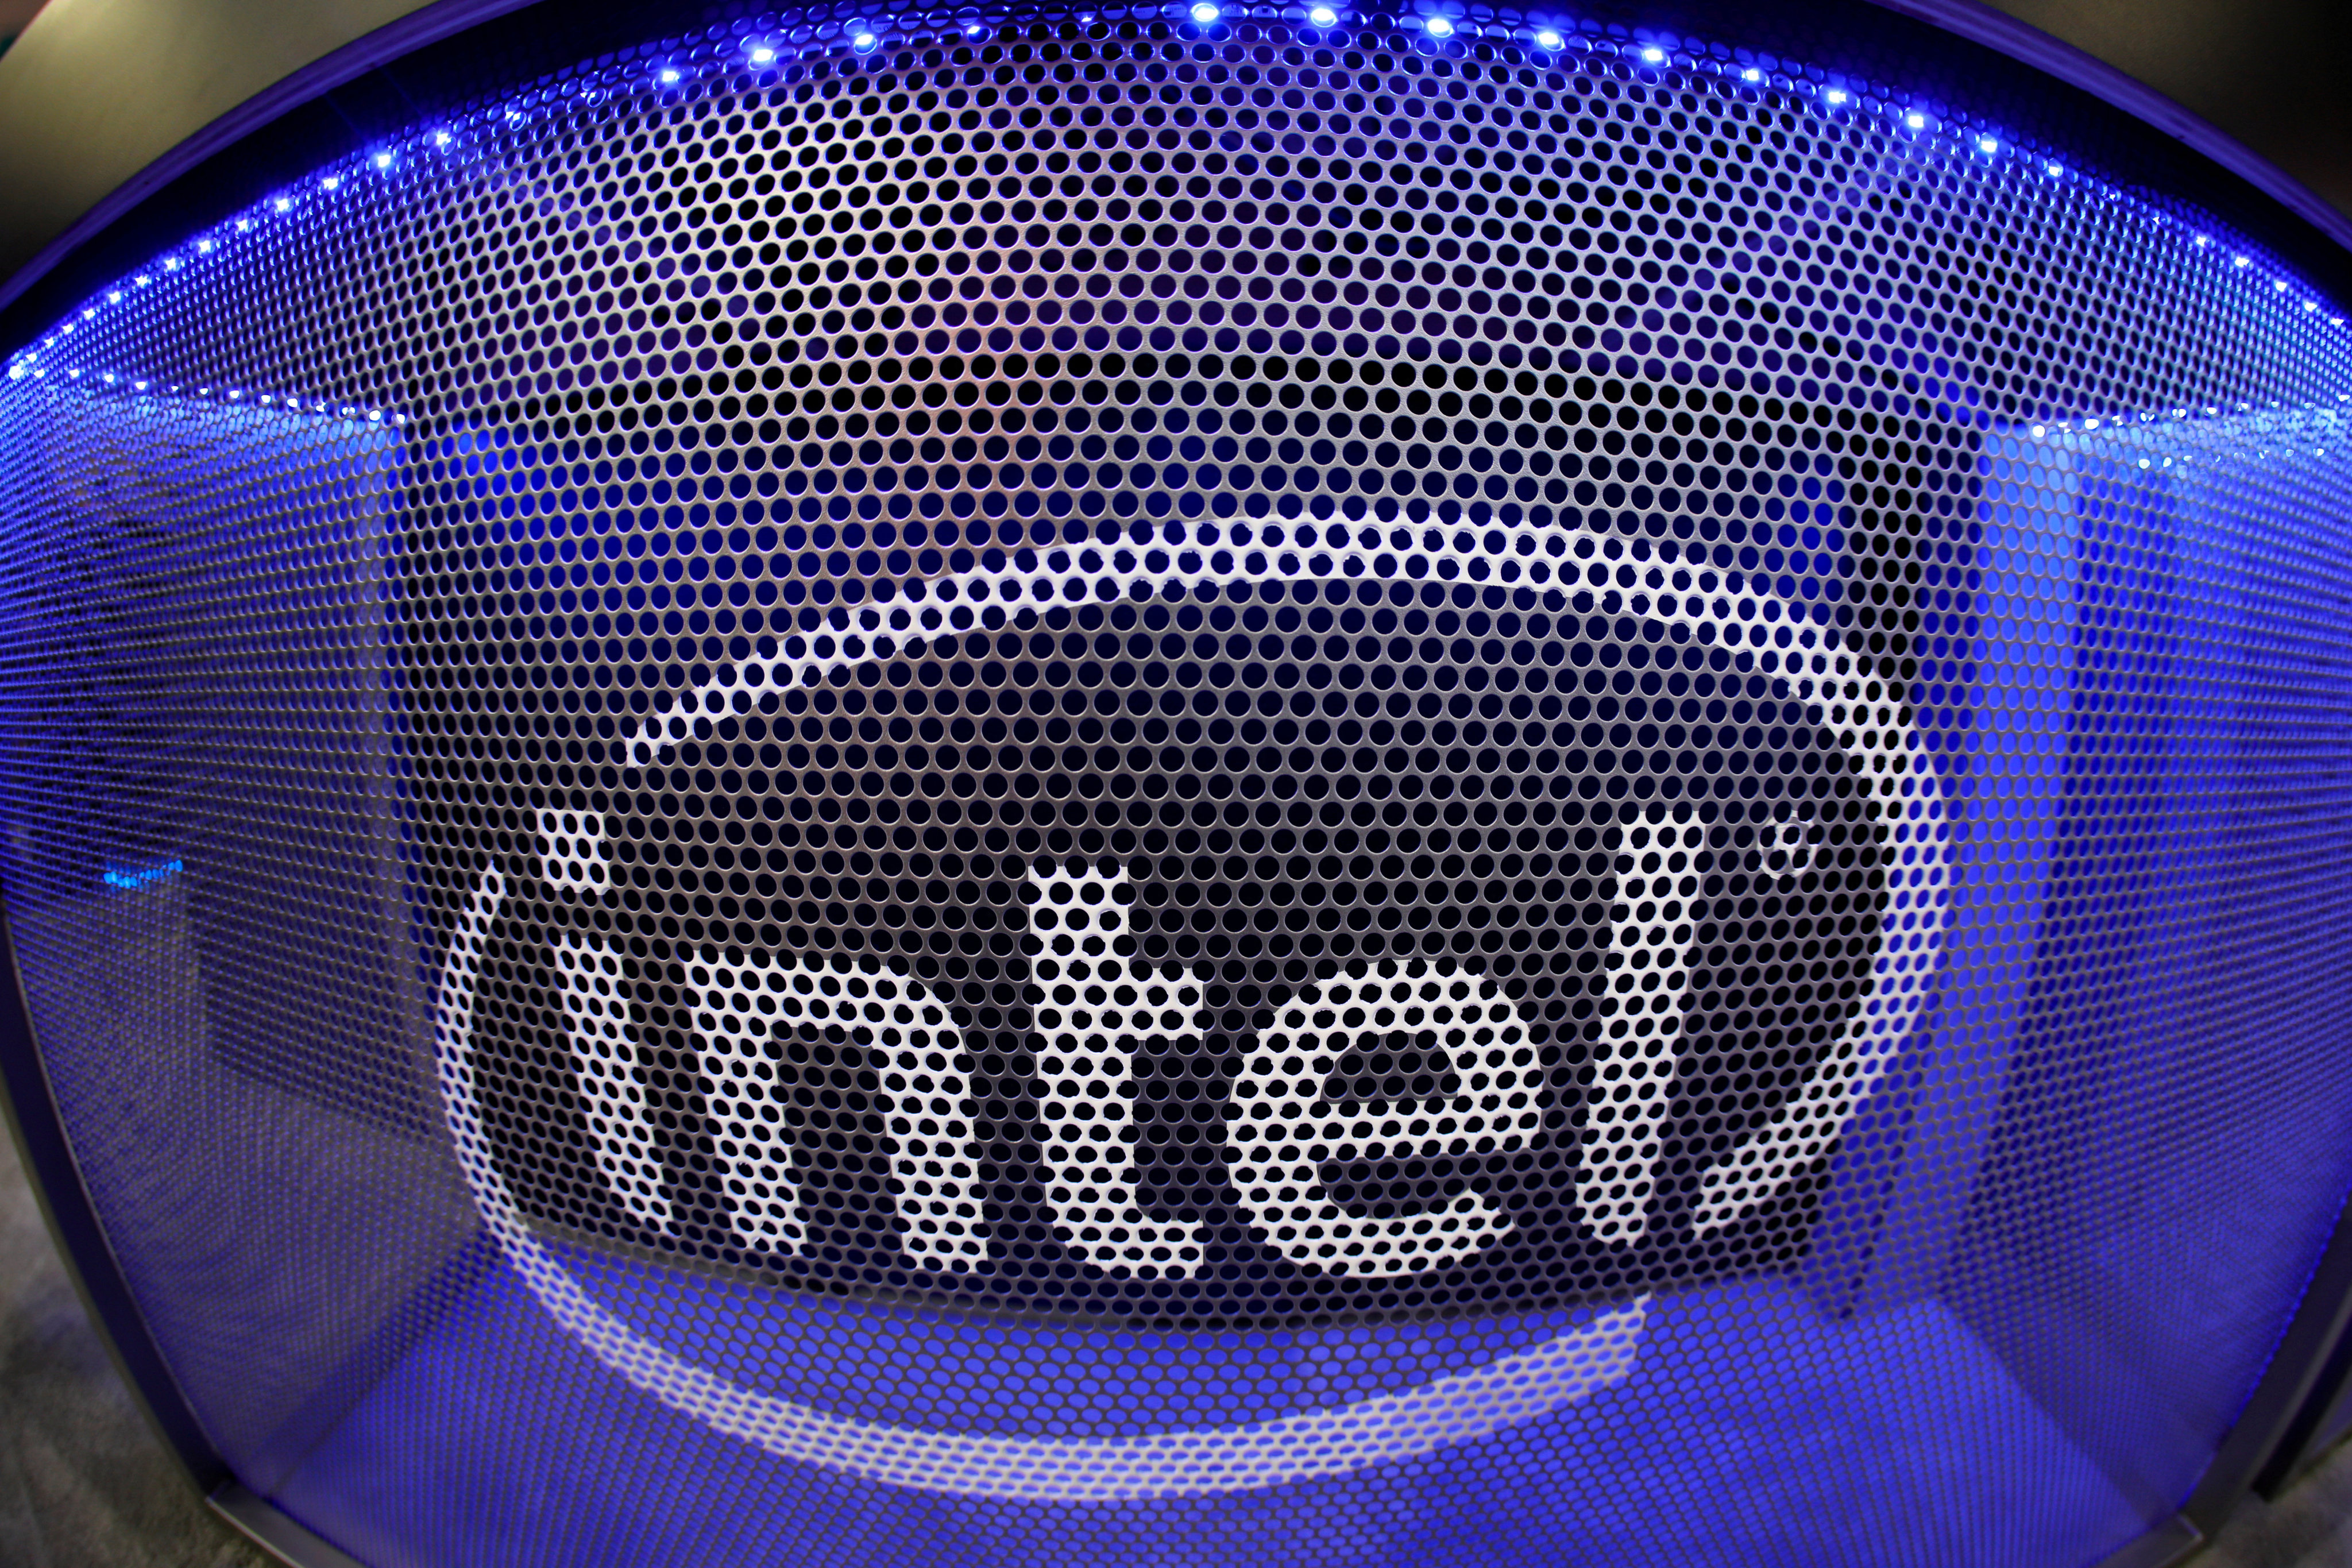 Computer chip maker Intel’s logo is shown on a gaming computer display during the opening day of E3, the annual video games expo revealing the latest in gaming software and hardware in Los Angeles, California, on June 11, 2019.  Photo: Reuters